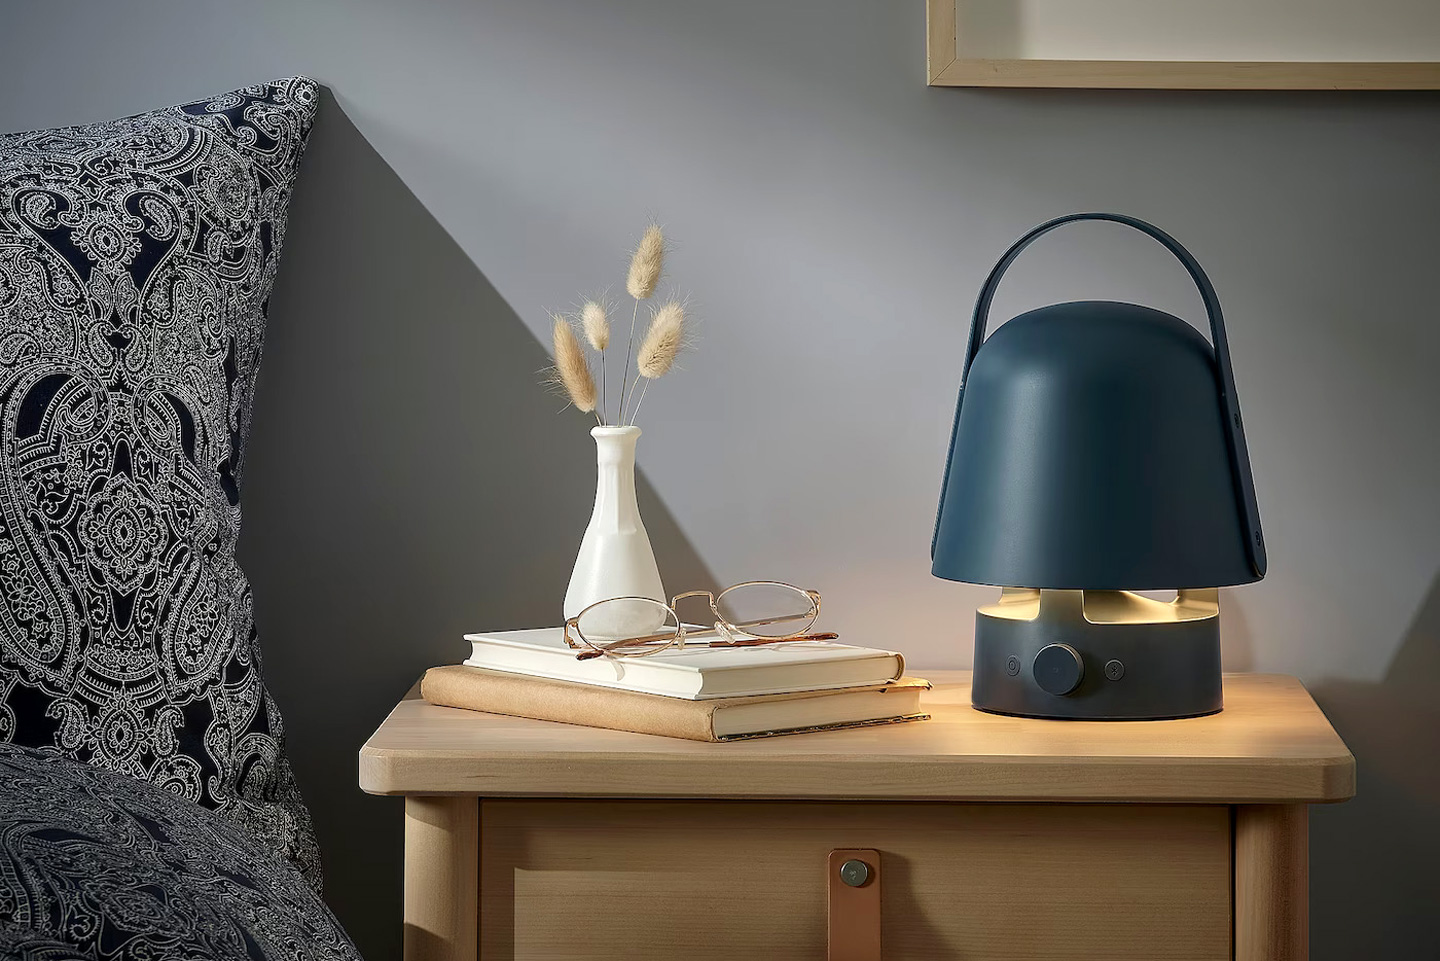 #IKEA teams up with Spotify to debut the Vappeby, a $65 wireless lamp/speaker with built-in ‘Spotify Tap’